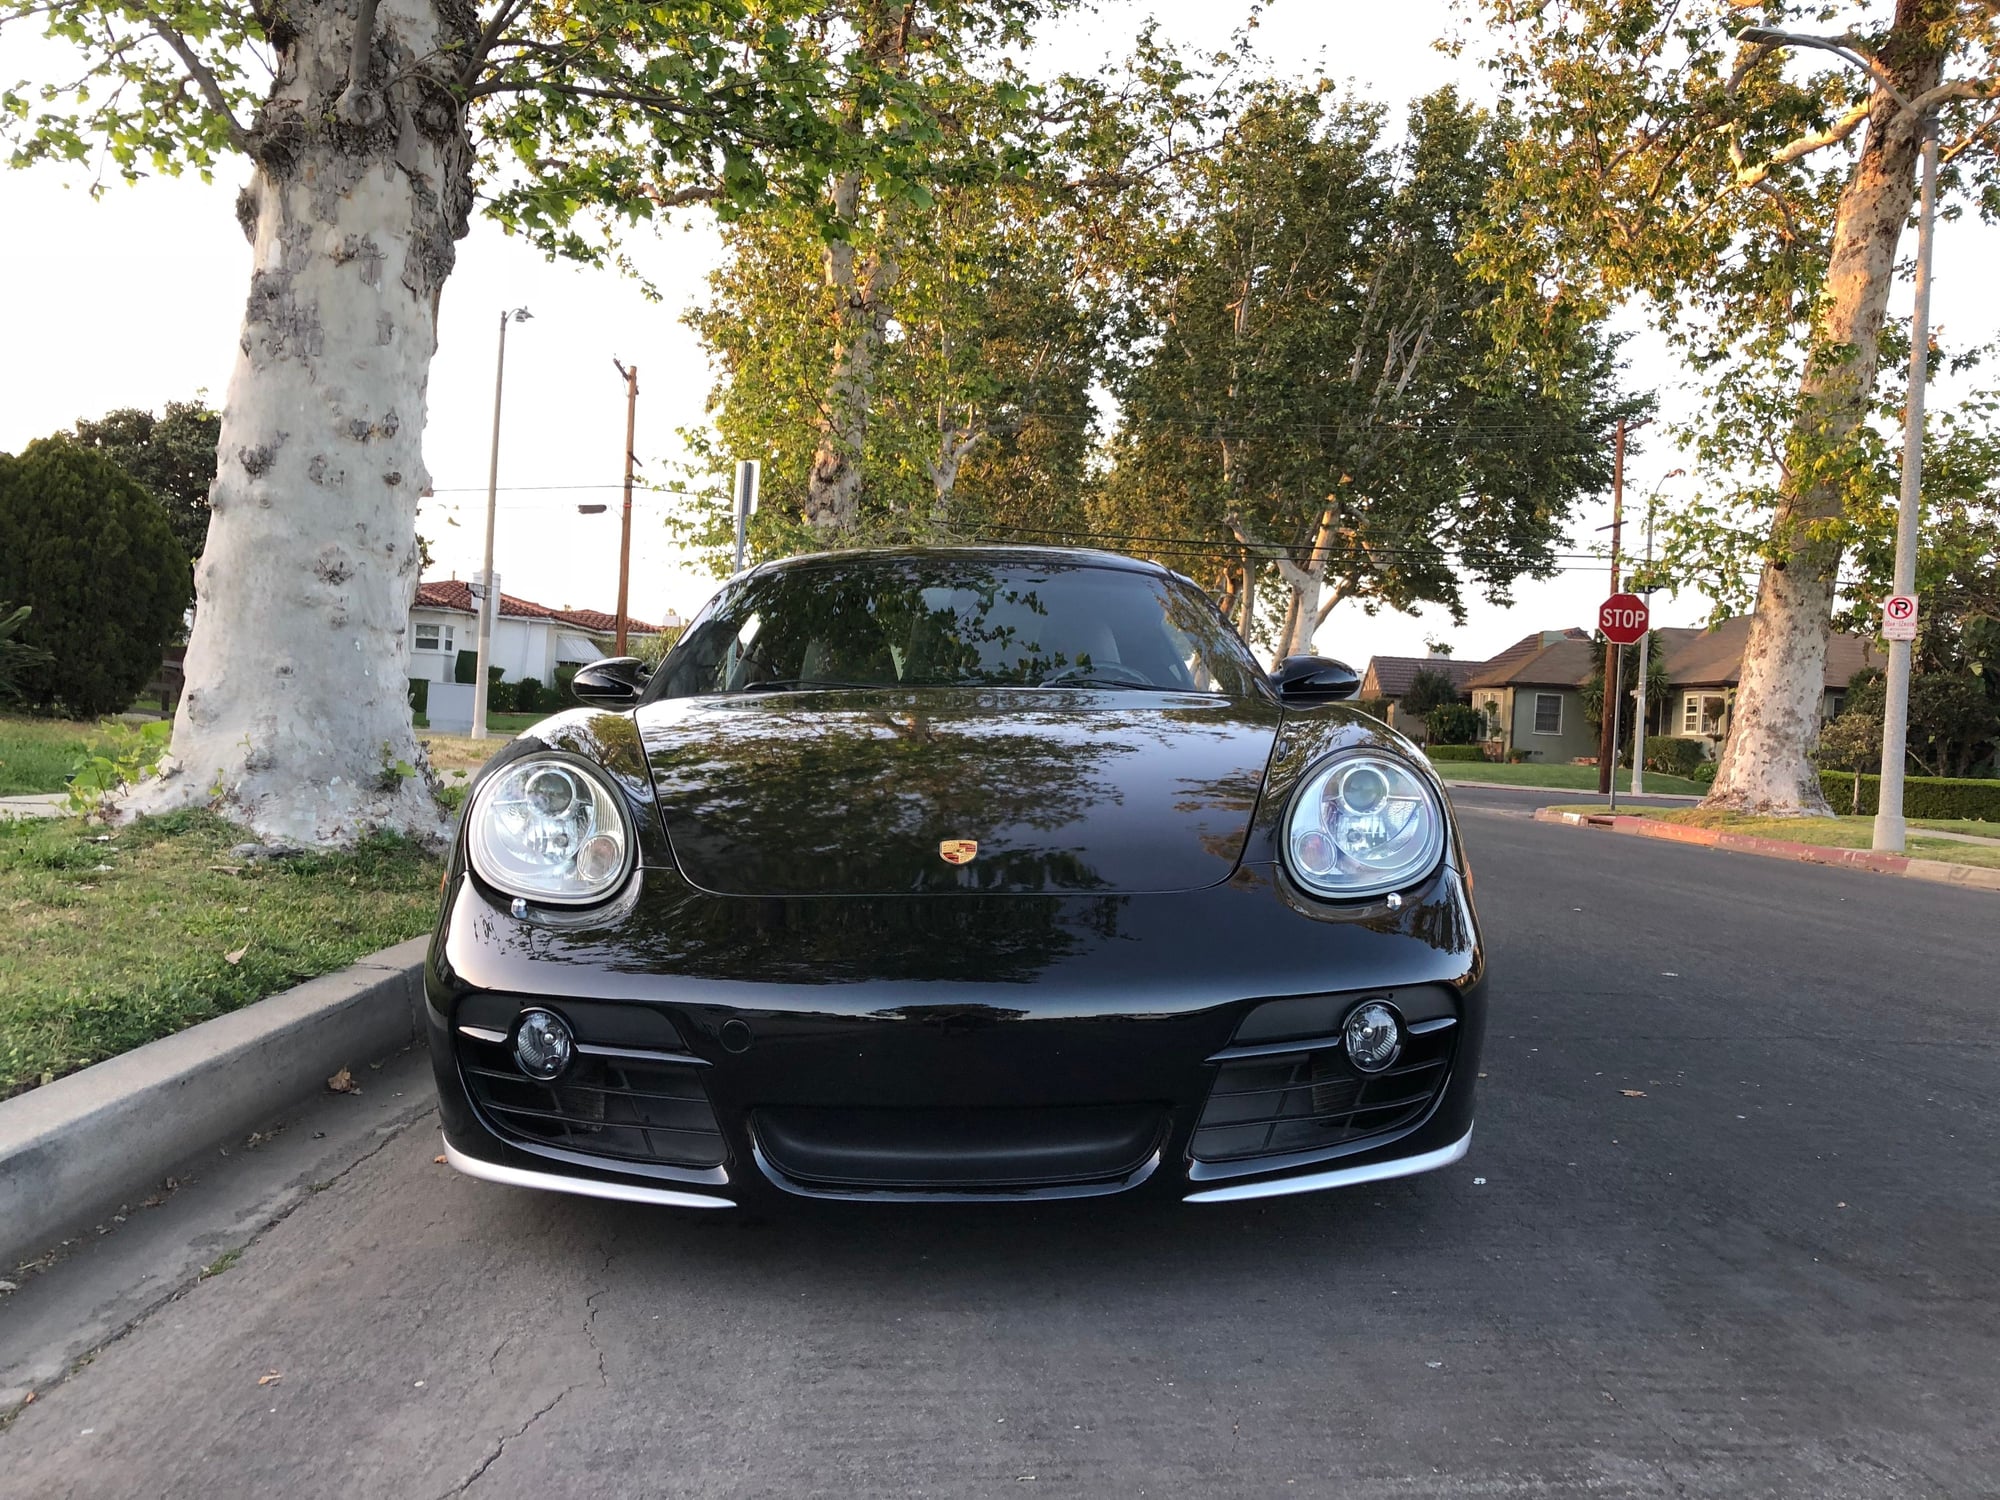 2006 Porsche Cayman - 2006 Porsche Cayman S-Sport Adaptive Seats+ GMG maintained - Used - VIN WP0AB29896U785297 - 79,000 Miles - 6 cyl - 2WD - Manual - Coupe - Black - Culver City, CA 90016, United States